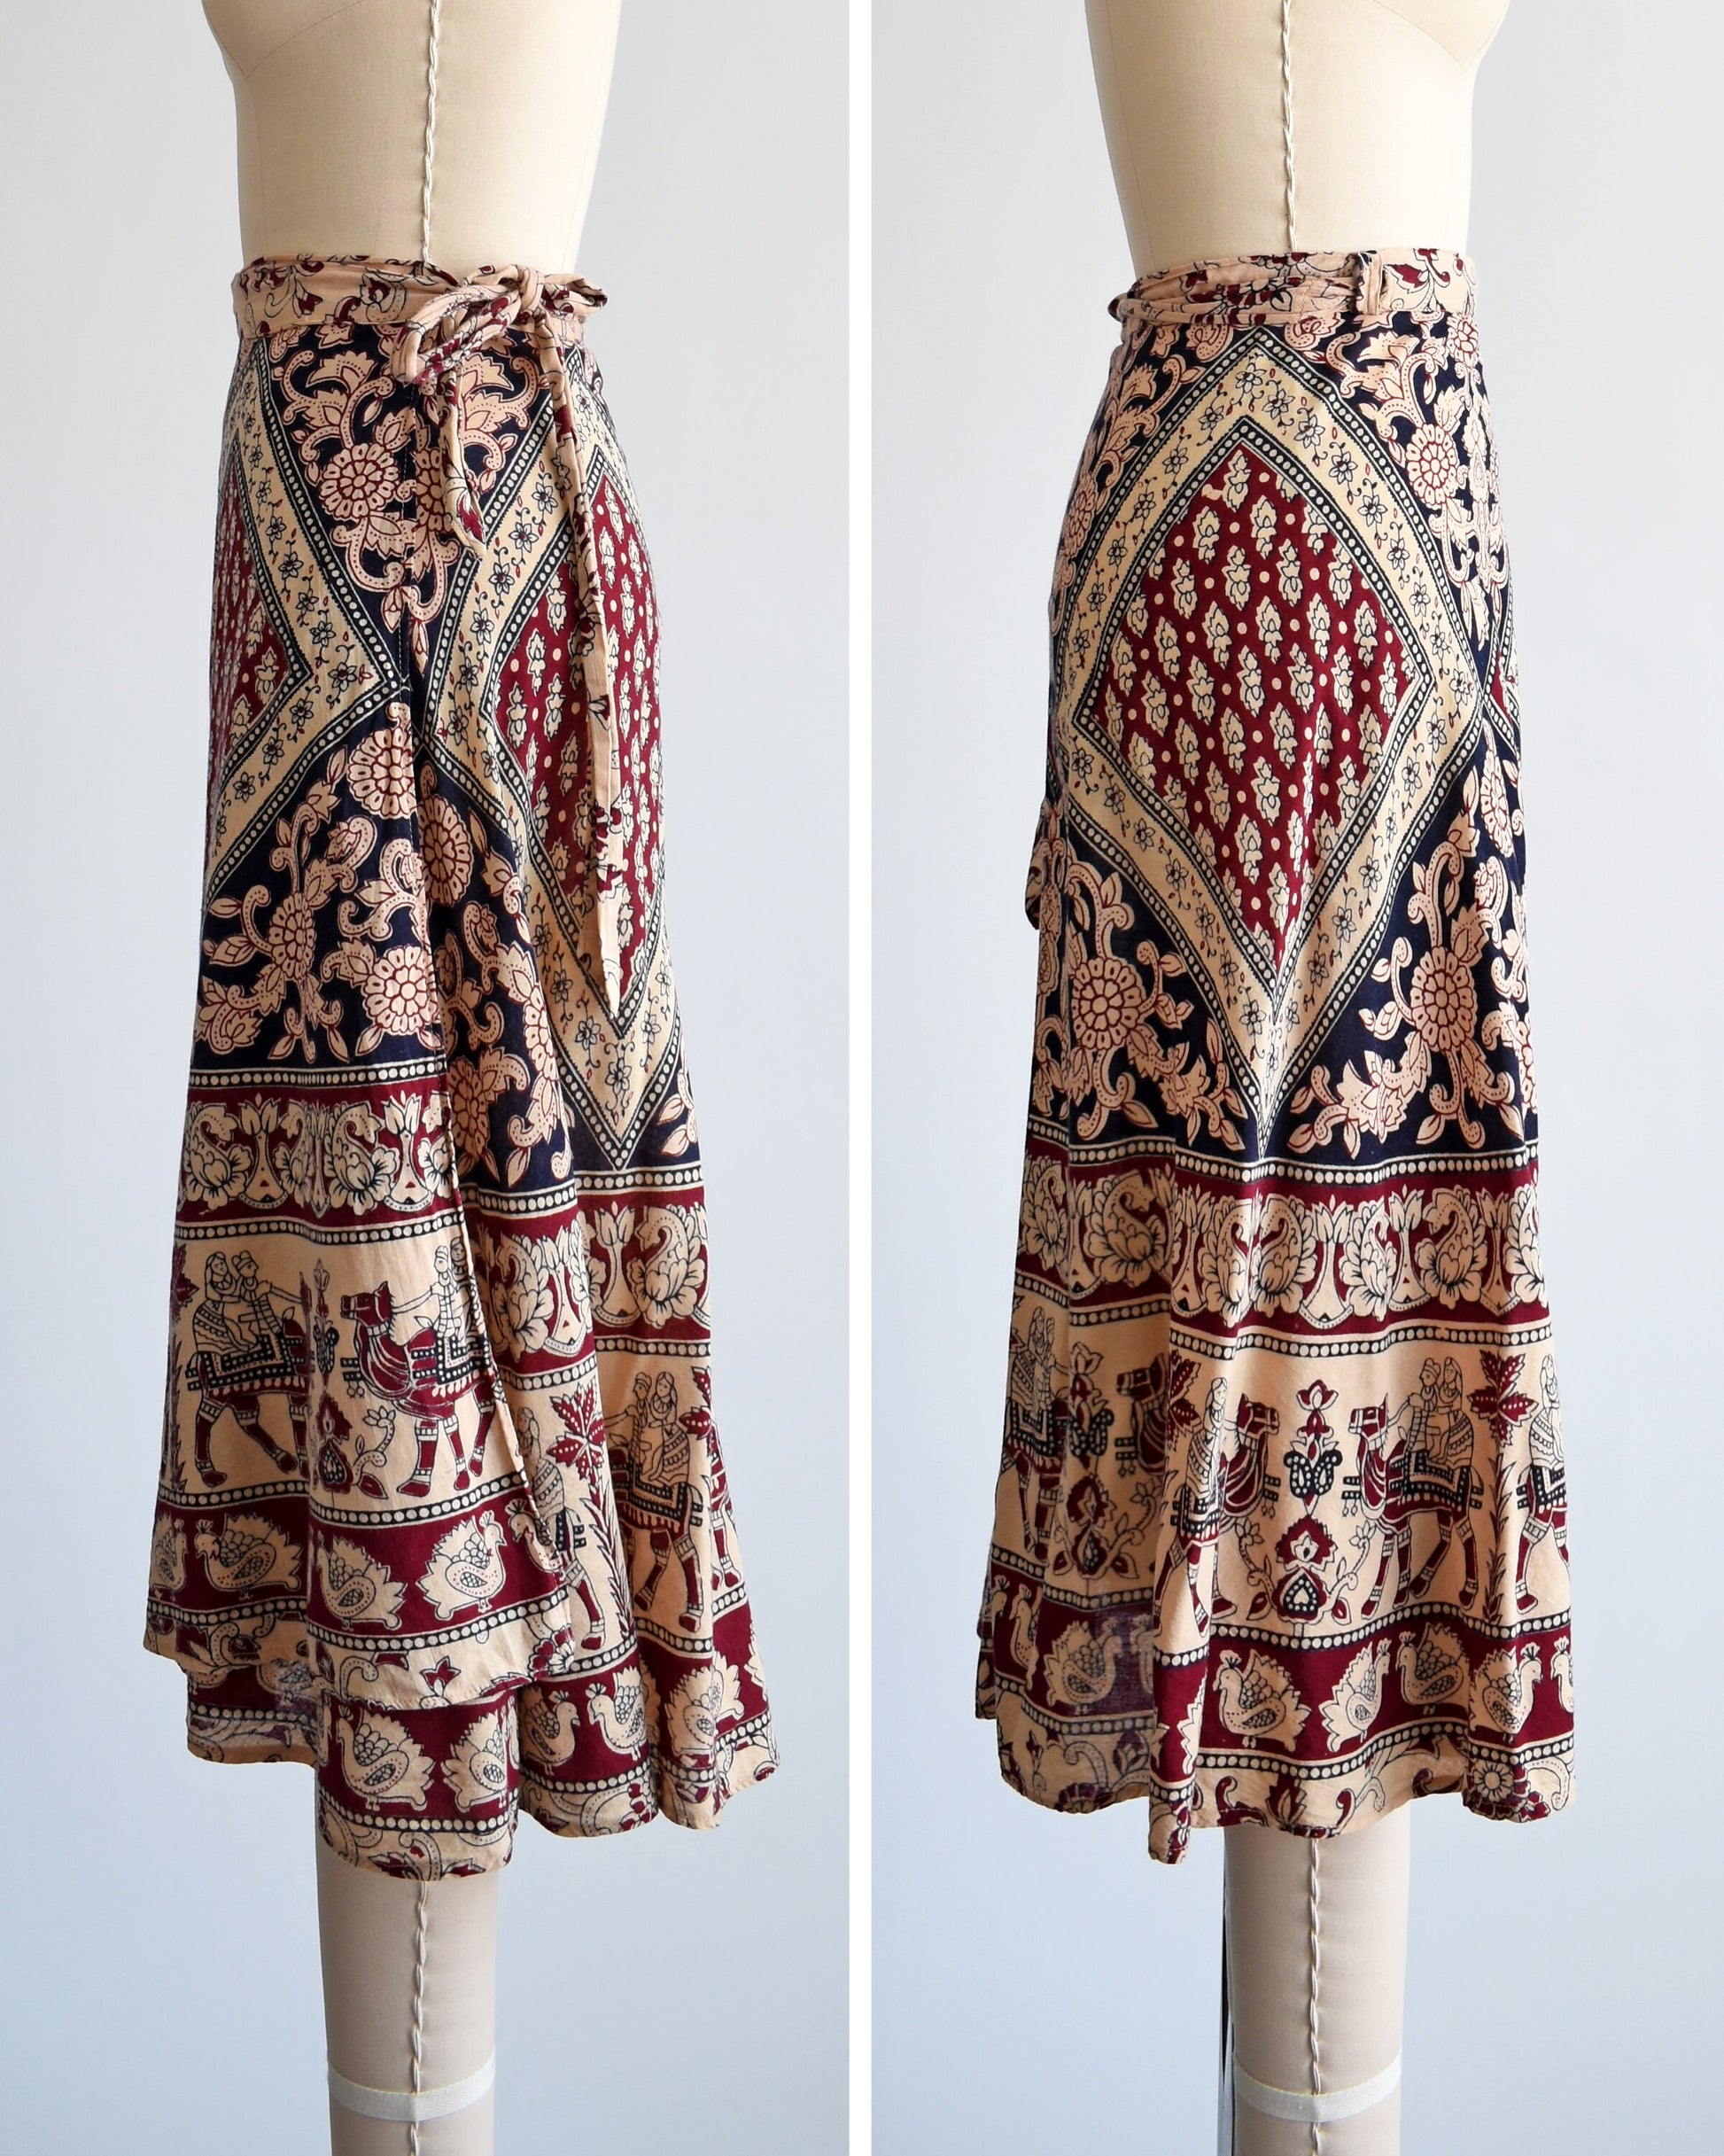 Side by side views of a vintage 1970s cotton wrap skirt that is beige with a large burgundy and black batik block floral print that covers the entire skirt, along border prints of people riding camels and a bird print. Skirt is on a dress form